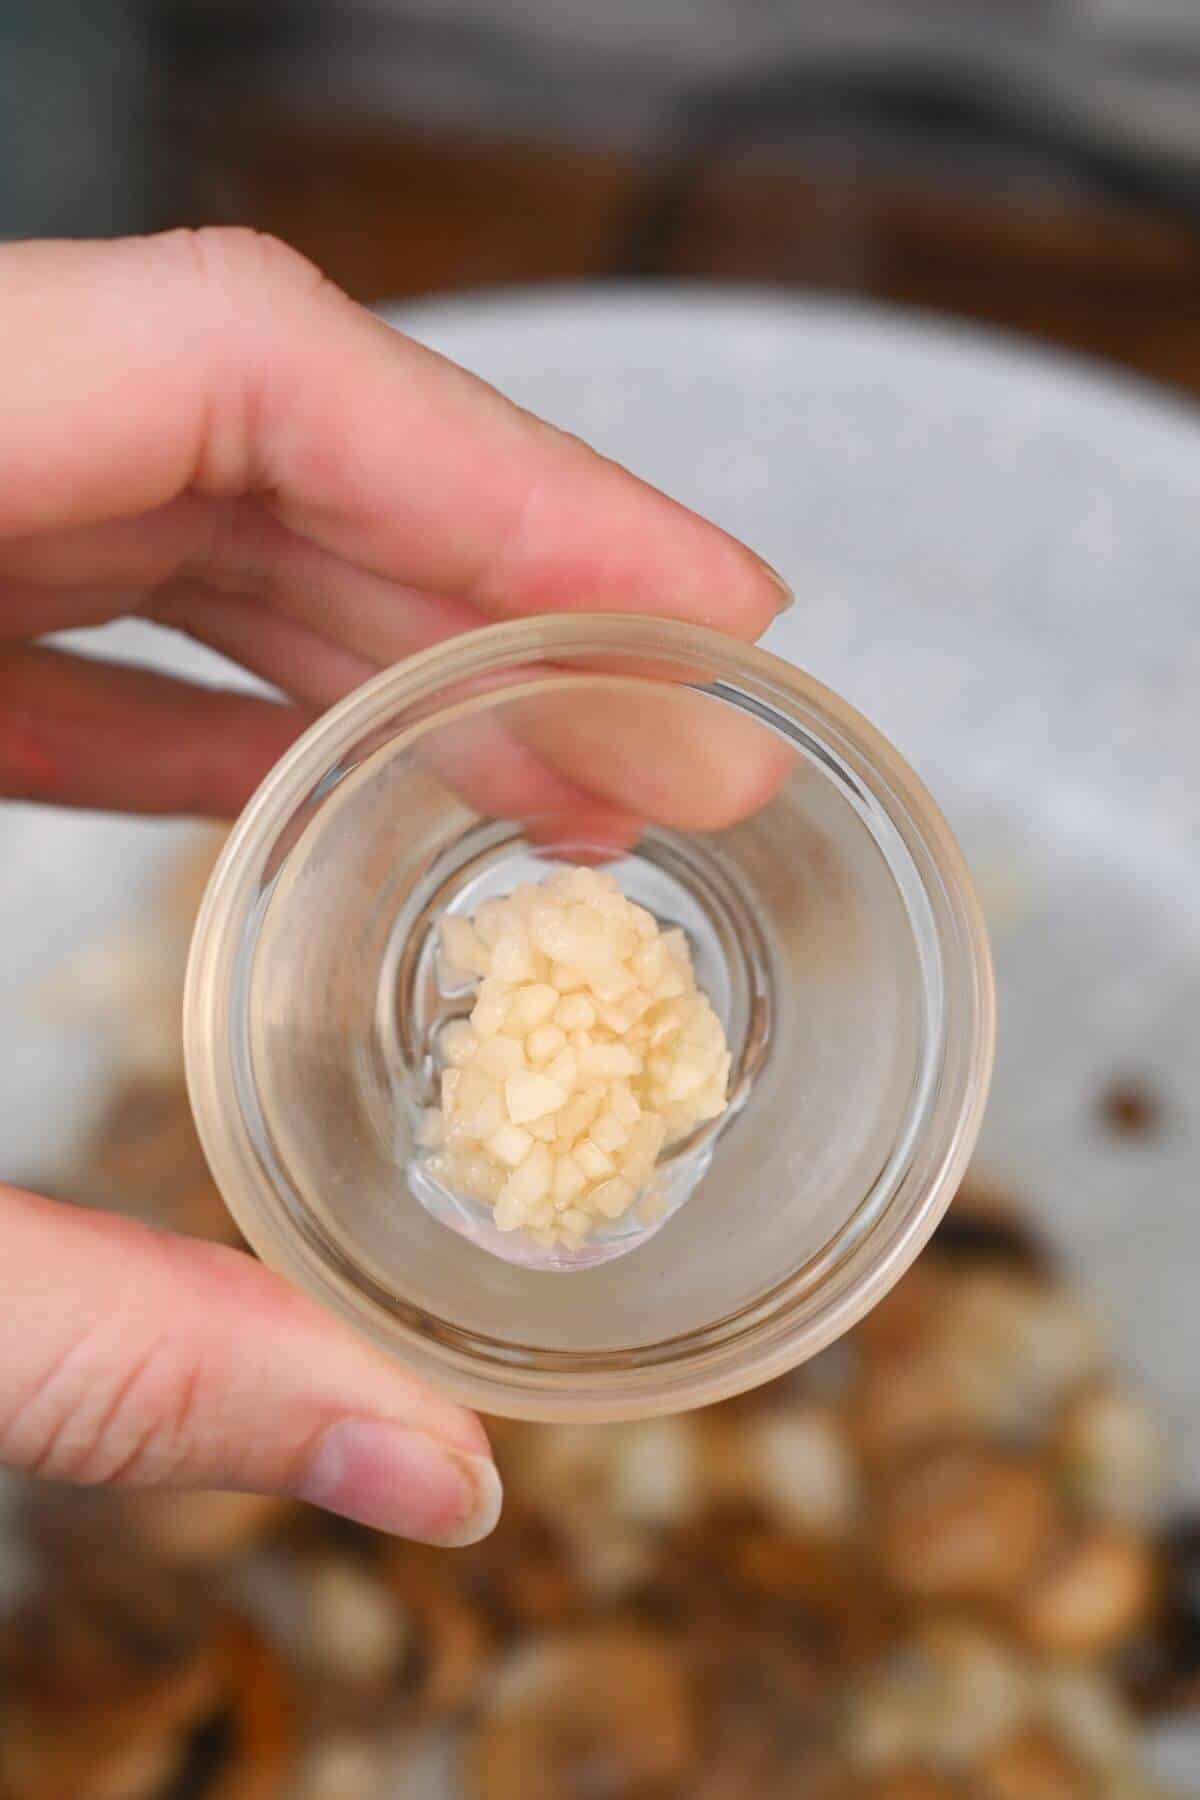 A person holding a glass bowl with minced garlic in it.